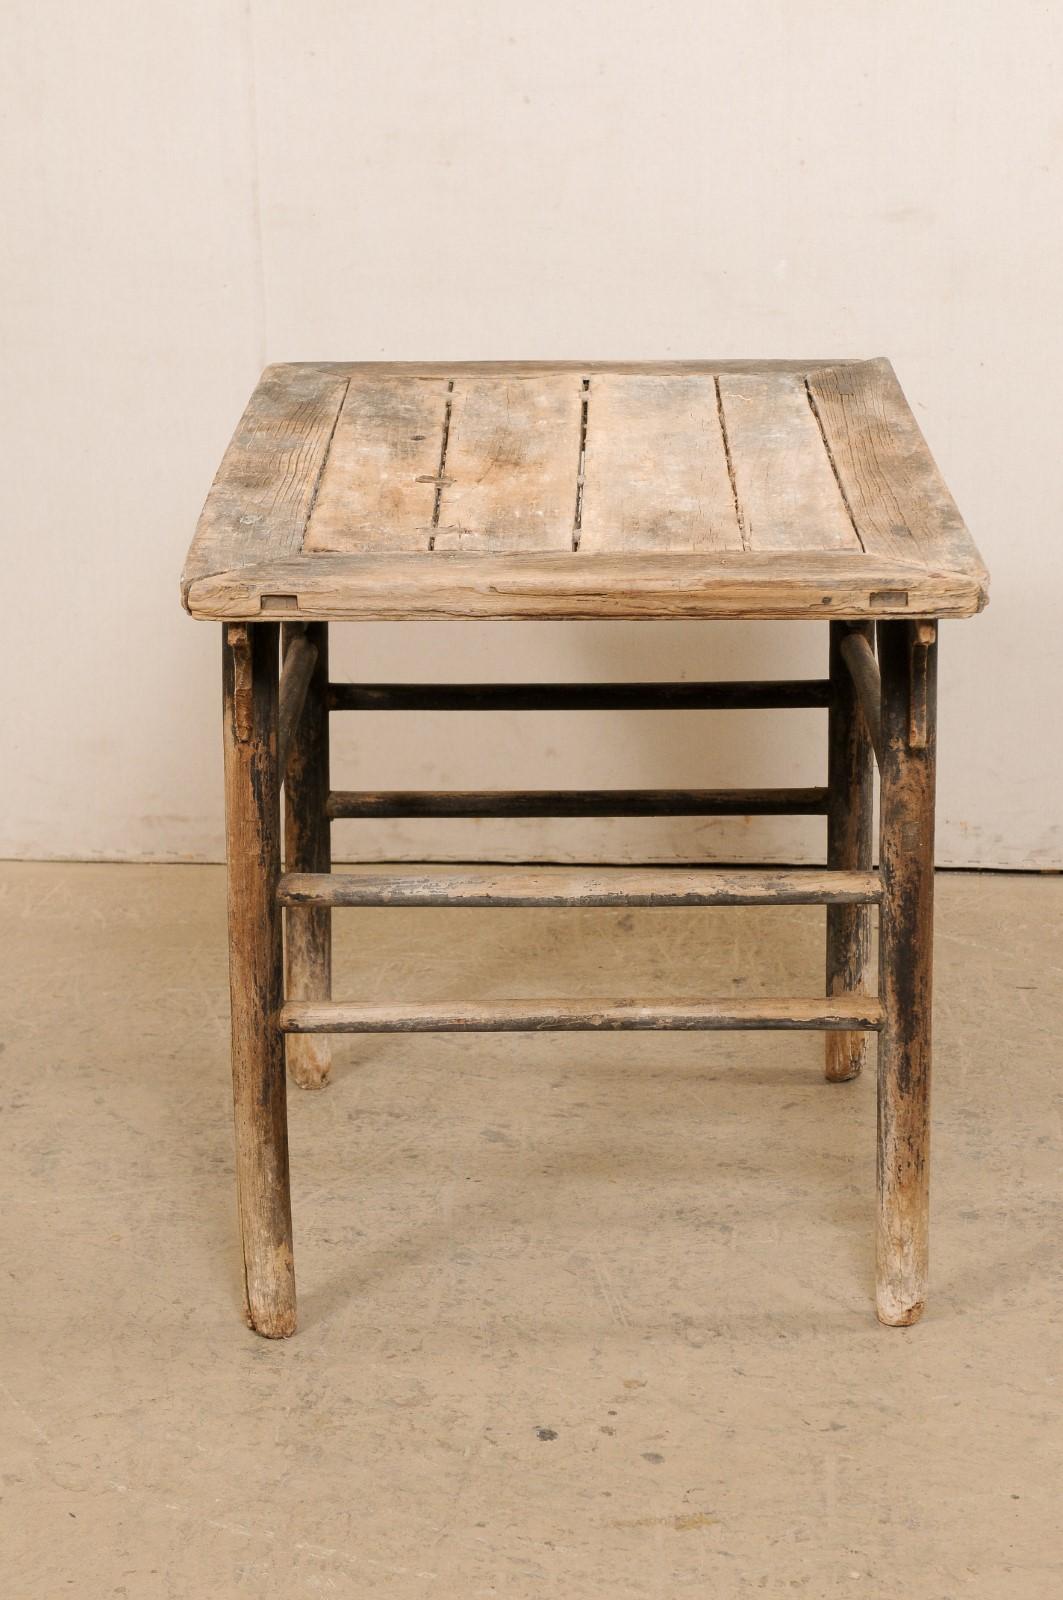 19th Century 19th C. Chinese Occasional Table w/its Original Finish & Old Joinery Repairs For Sale